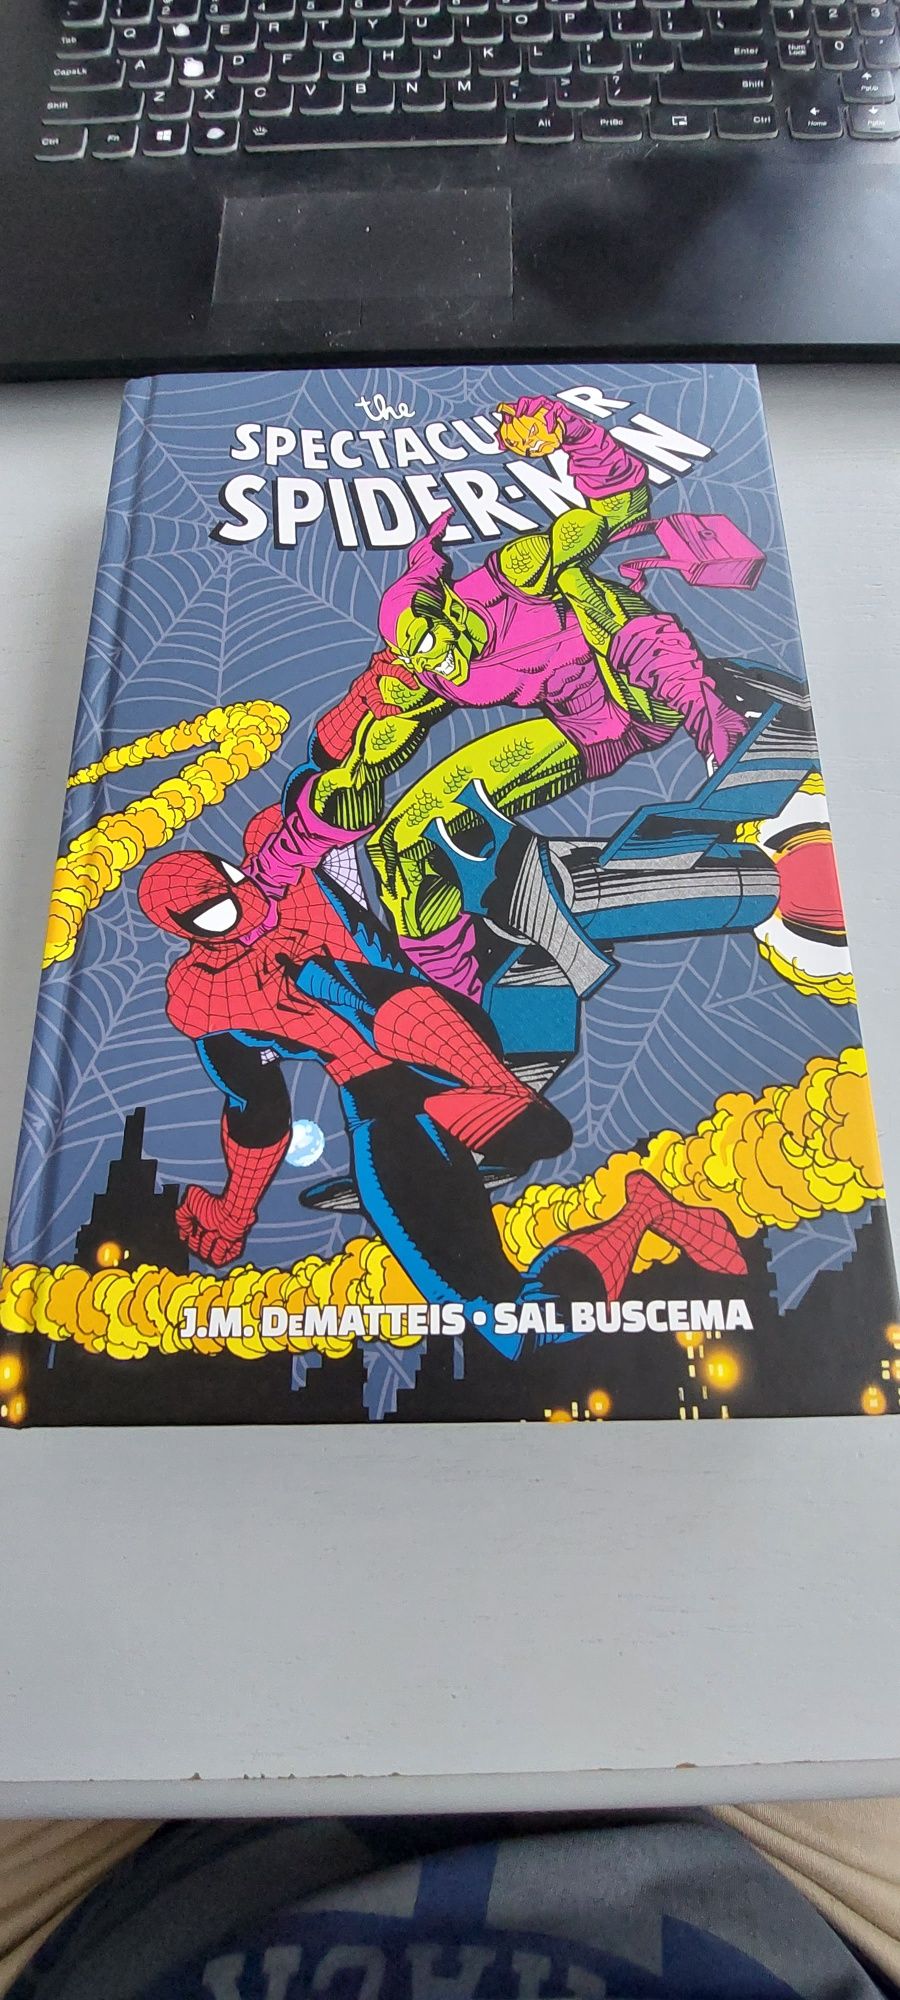 The Spectacular spider-man